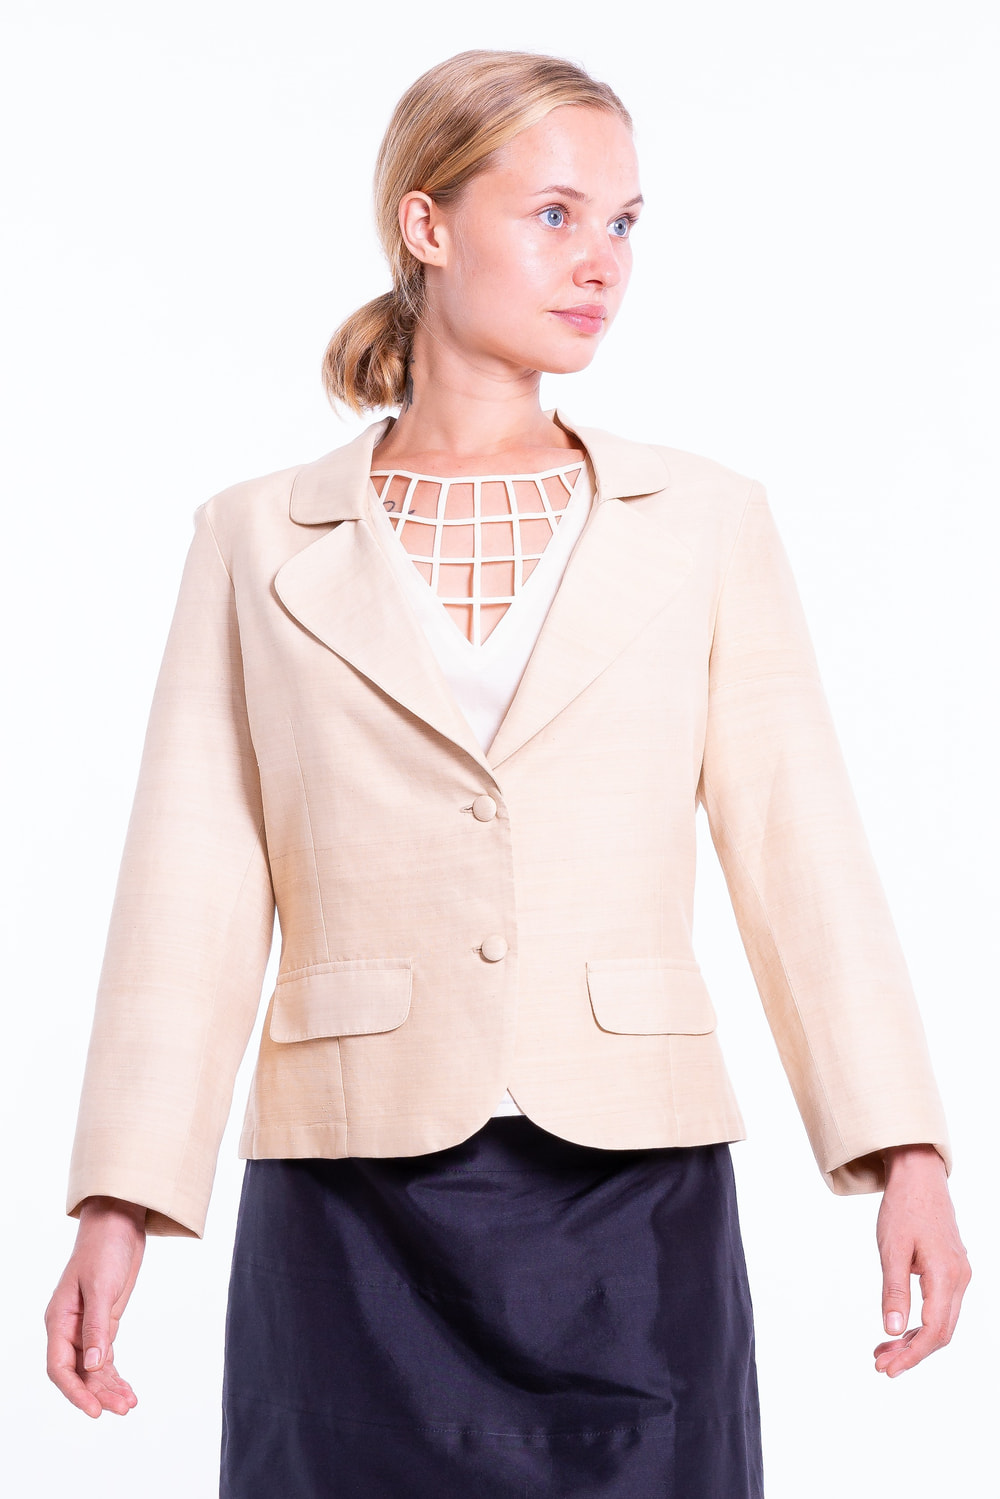 beige blazer in lotus fiber and natural silk, notched-collar and covered buttons, decorative flap pockets, wrinkle-free